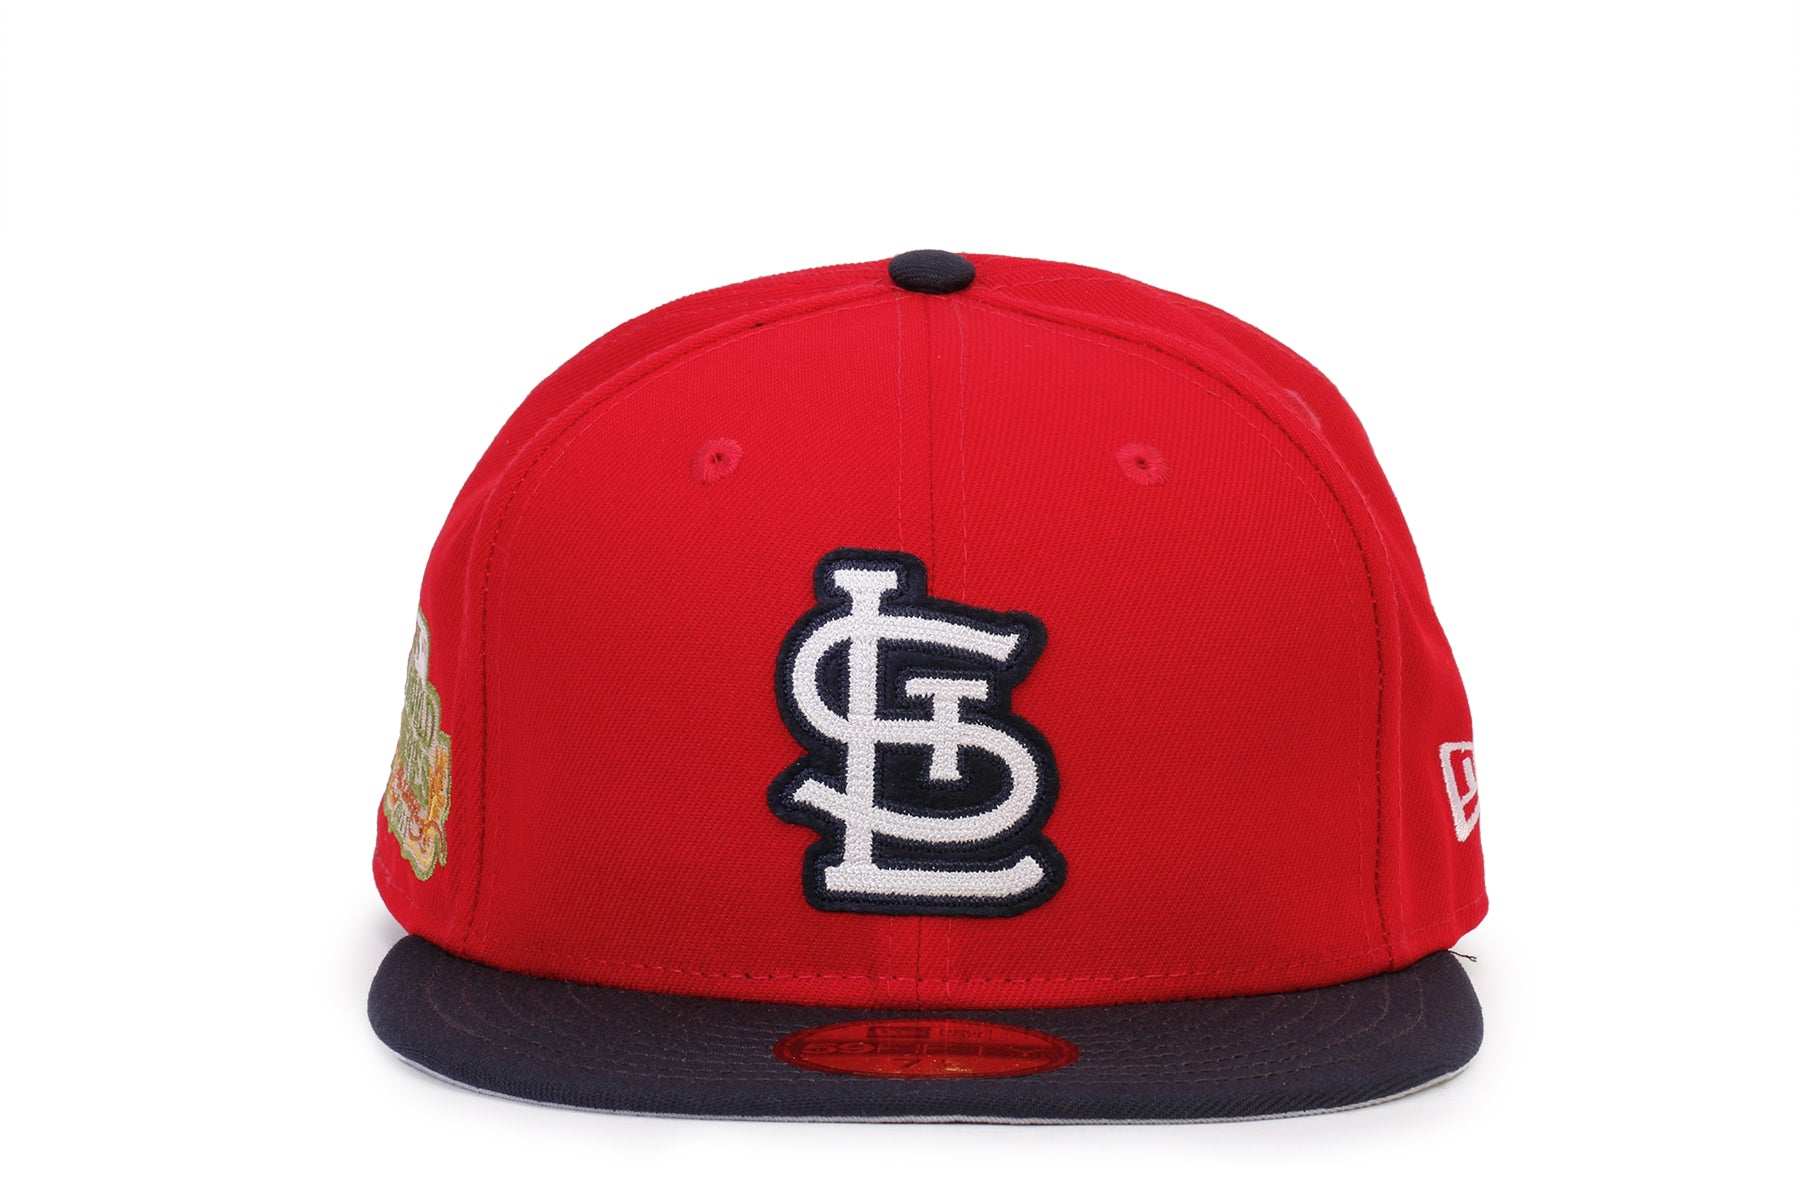 St. Louis Cardinals New Era Sidepatch 59FIFTY Fitted Hat - Black